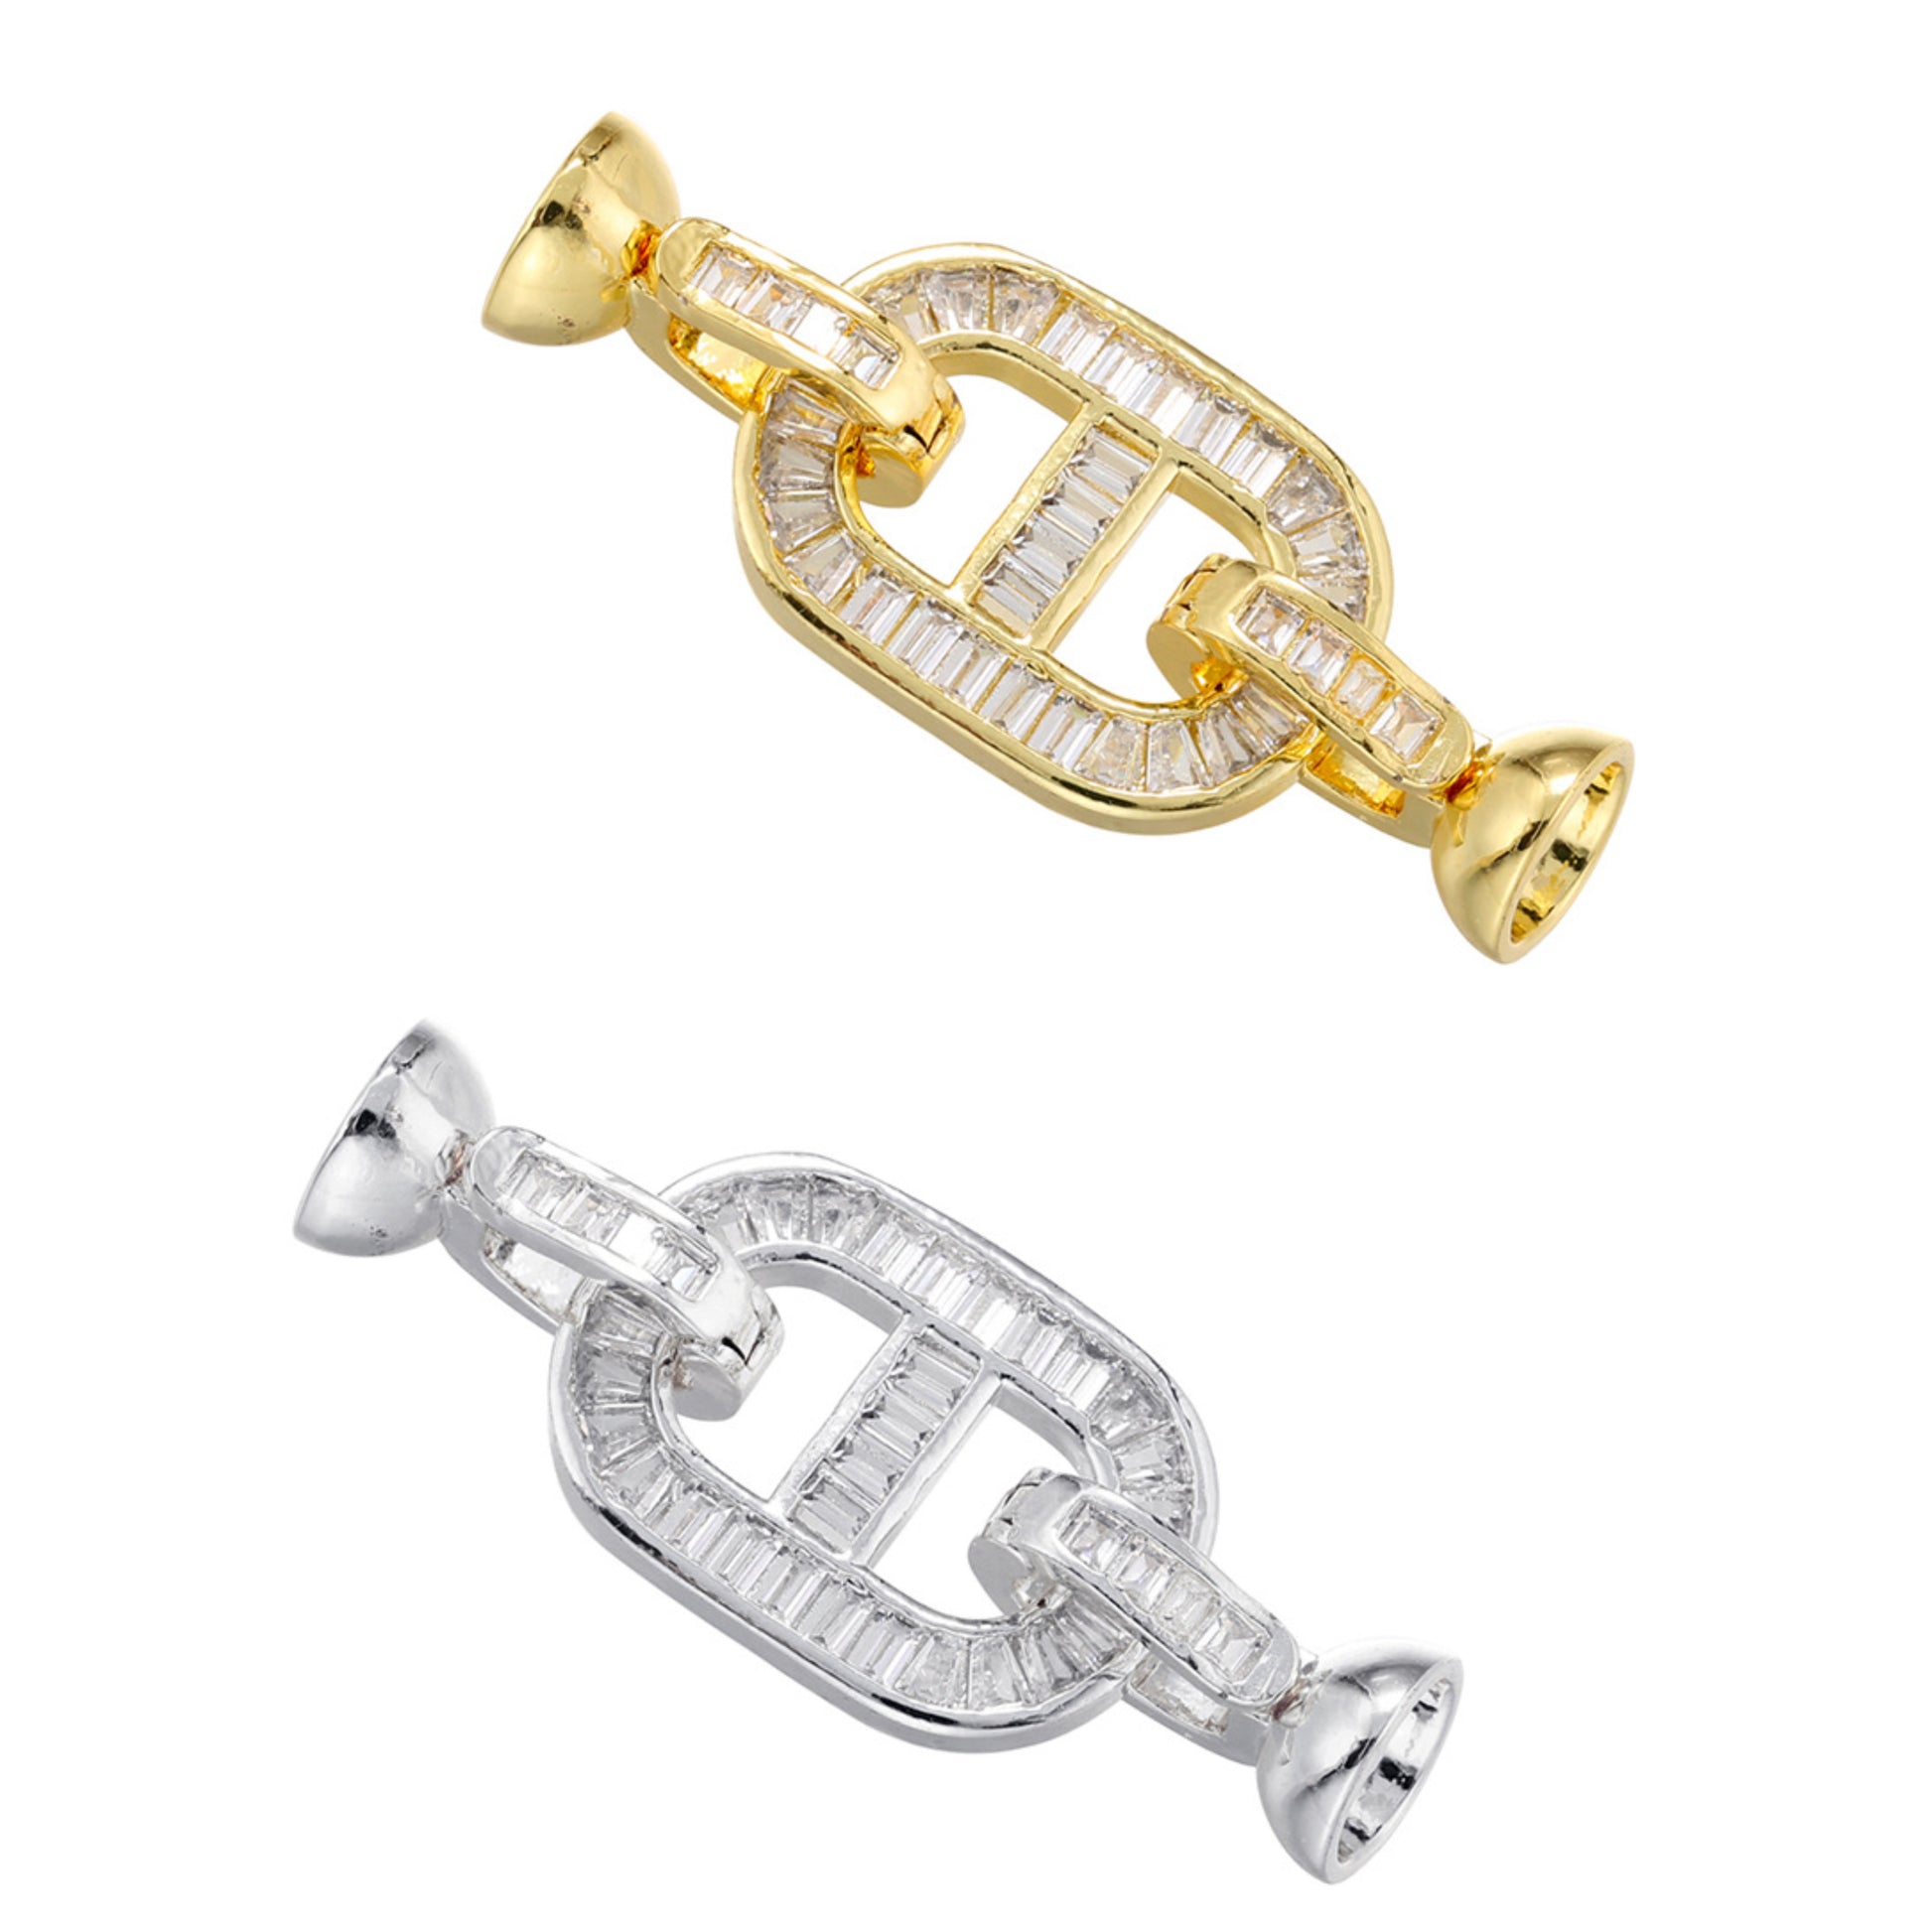 5pcs/lot CZ Paved Clasps Connector for Bracelets & Necklaces Making Mix Style 1 Accessories Charms Beads Beyond